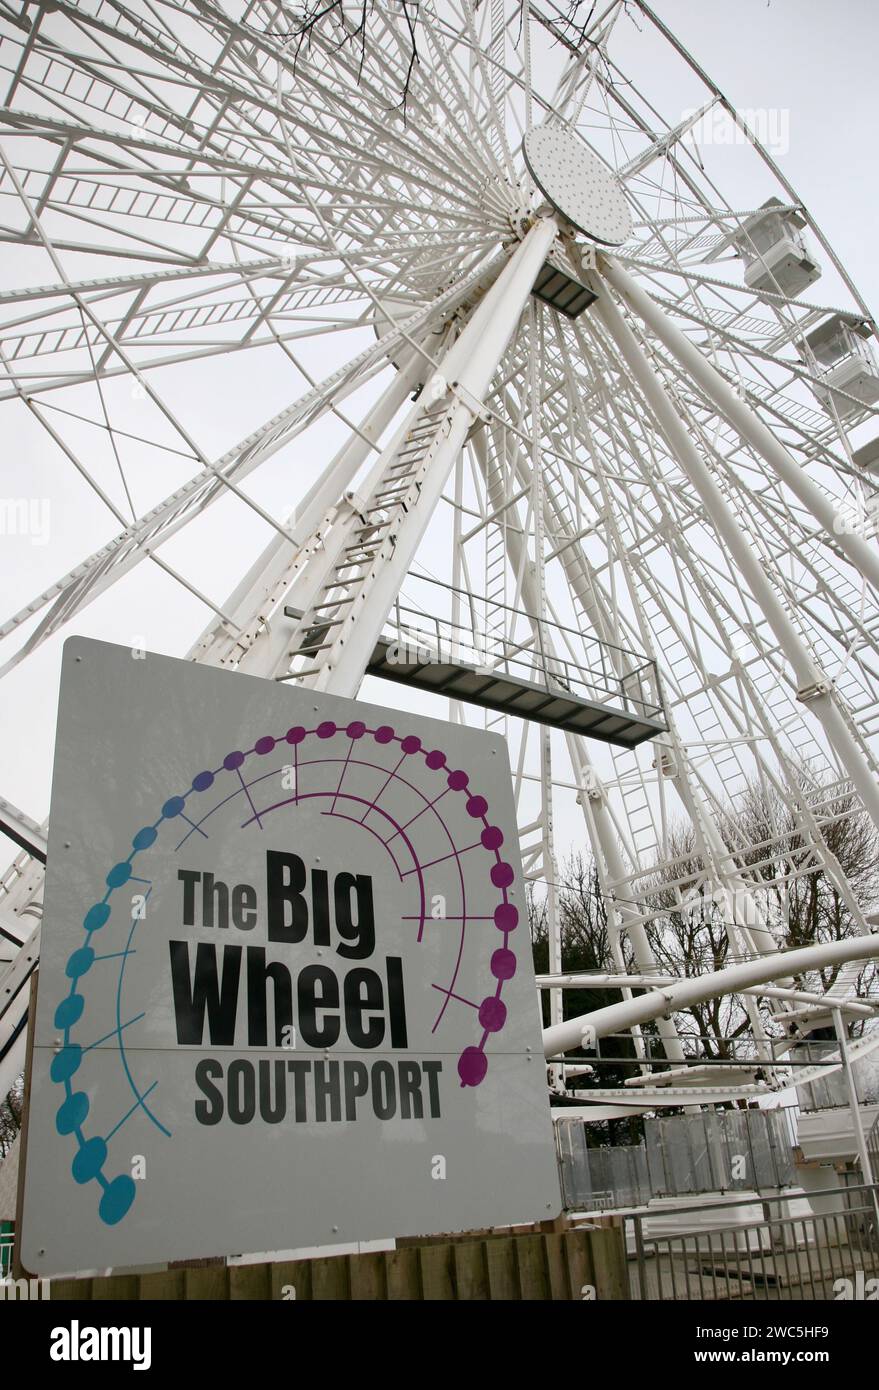 A close up view of the huge Ferris Wheel at the seaside resort of Southport on the North West coast of England, Europe Stock Photo